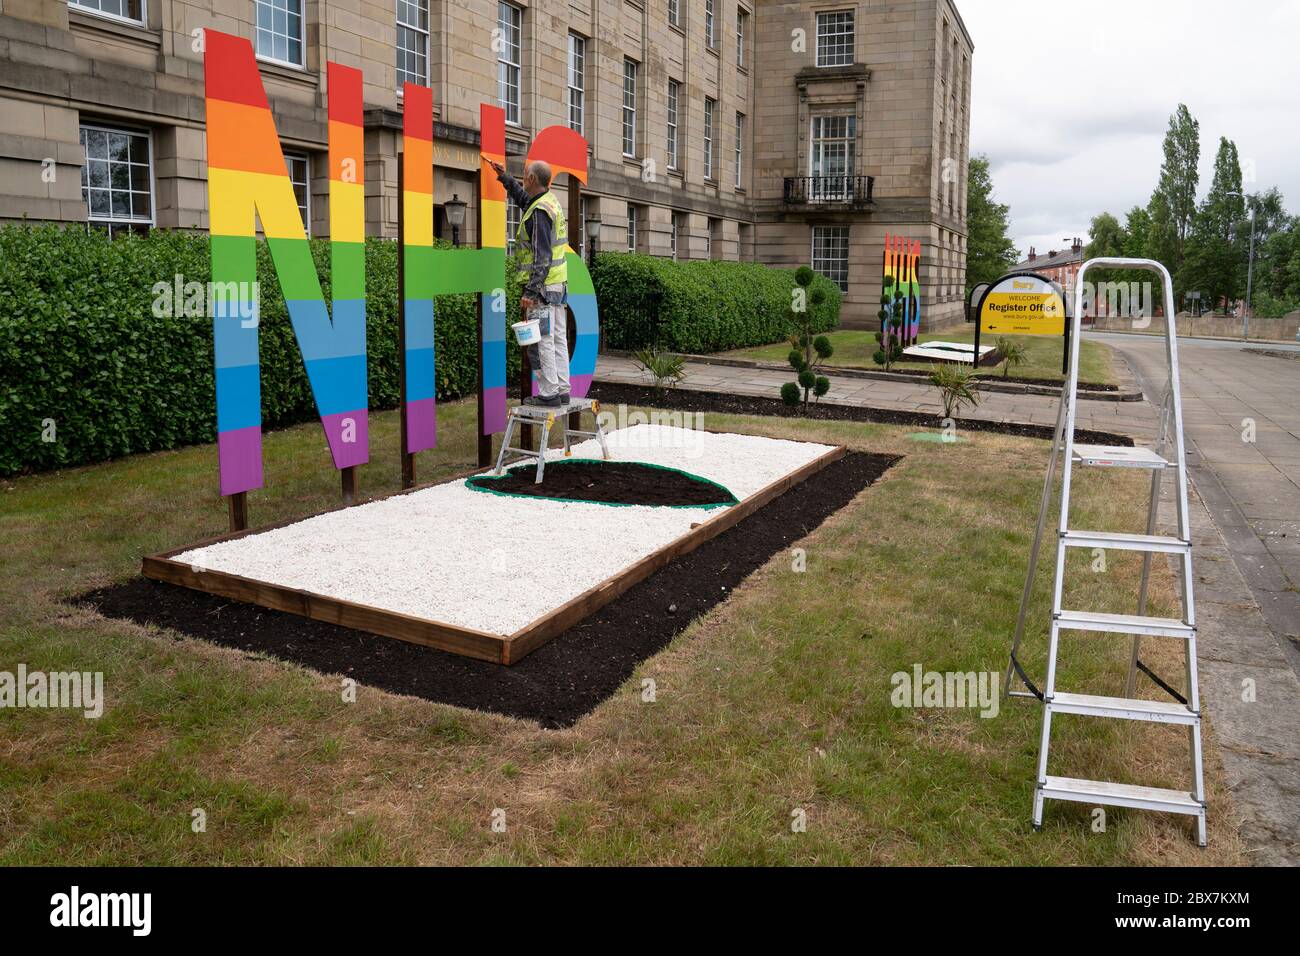 Bury, UK. 5th June, 2020. Picture shows an NHS sign being painted in raibow colours outside Bury Town Hall, Bury, UK. Credit: Jon Super/Alamy Stock Photo